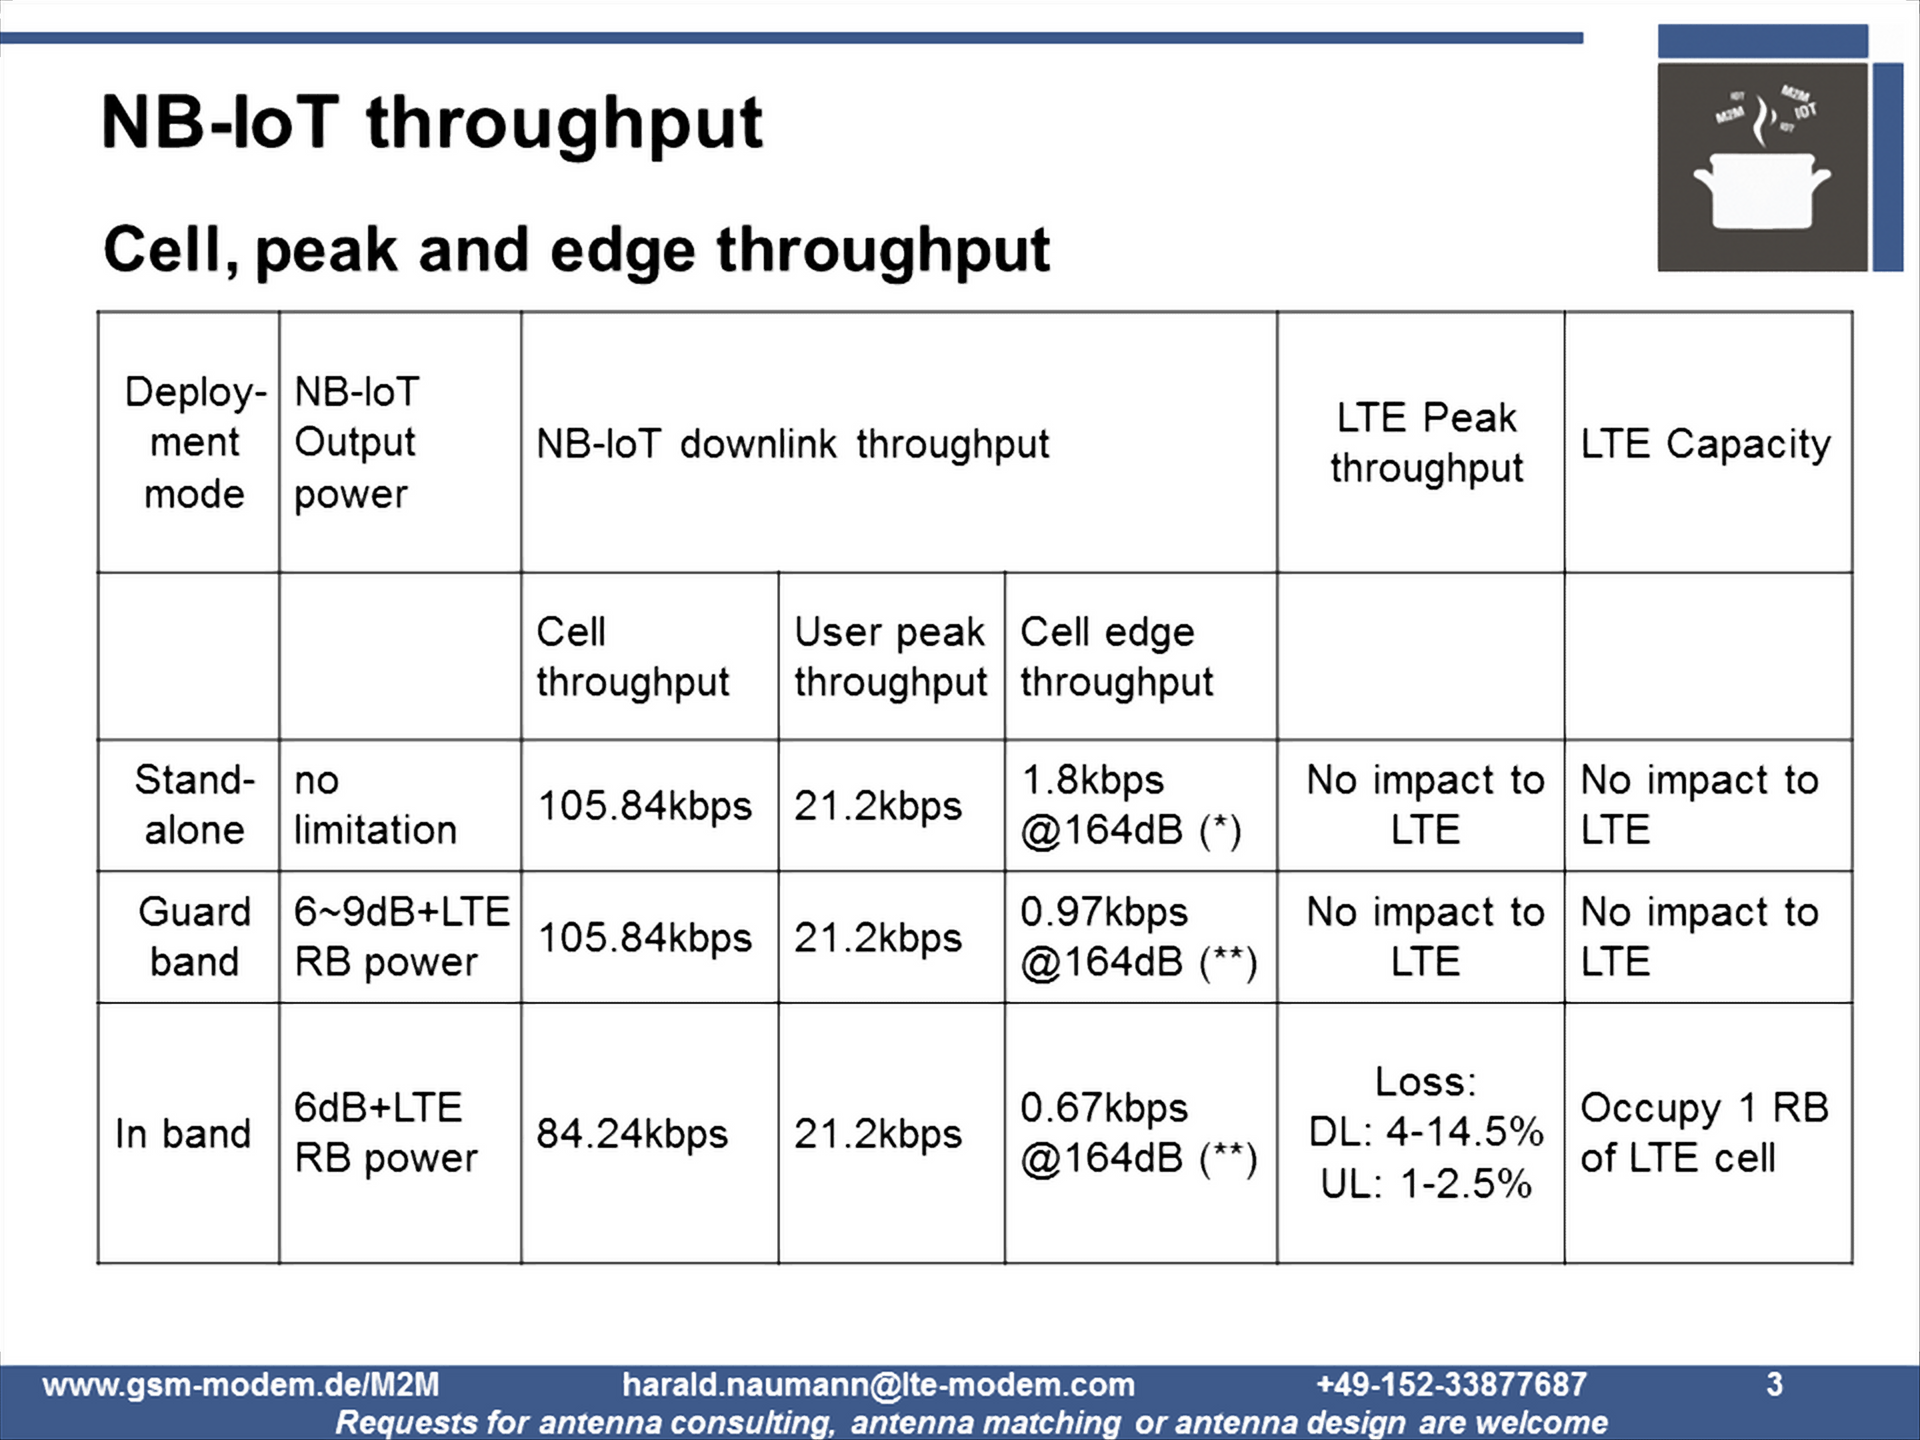 NB-IoT troughout - table